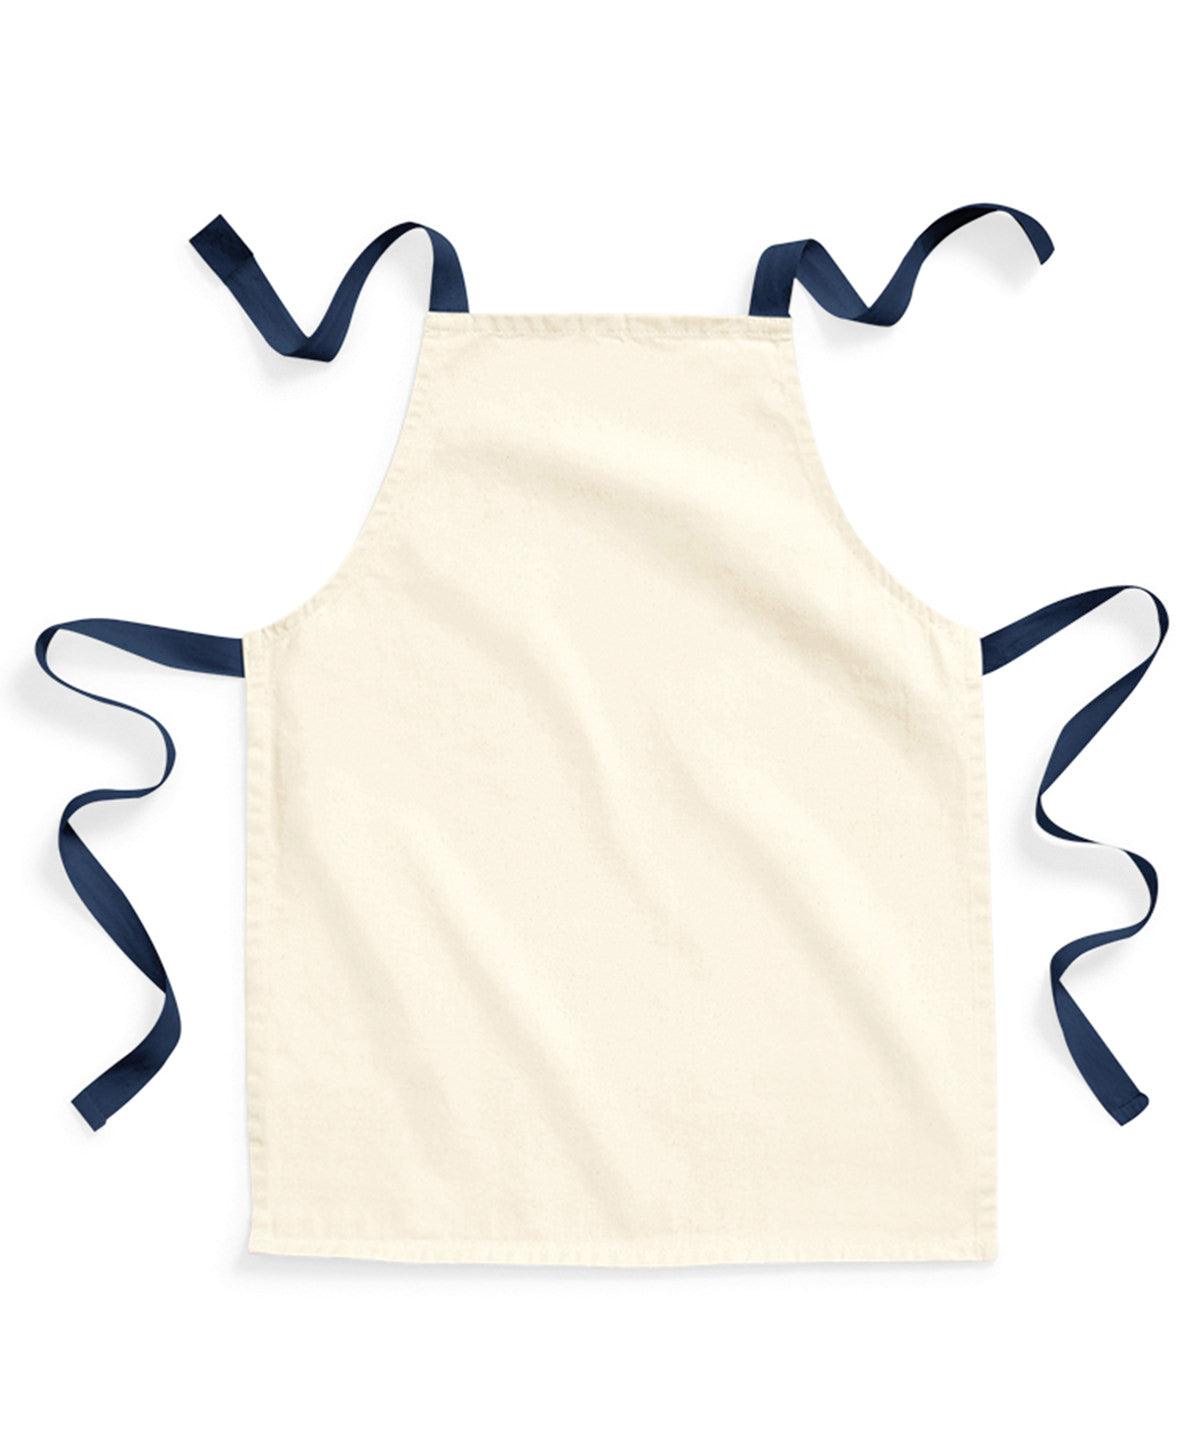 Natural/French Navy - Fairtrade cotton junior craft apron Aprons Westford Mill Aprons & Service, Junior, New Colours For 2022, Organic & Conscious, Workwear Schoolwear Centres